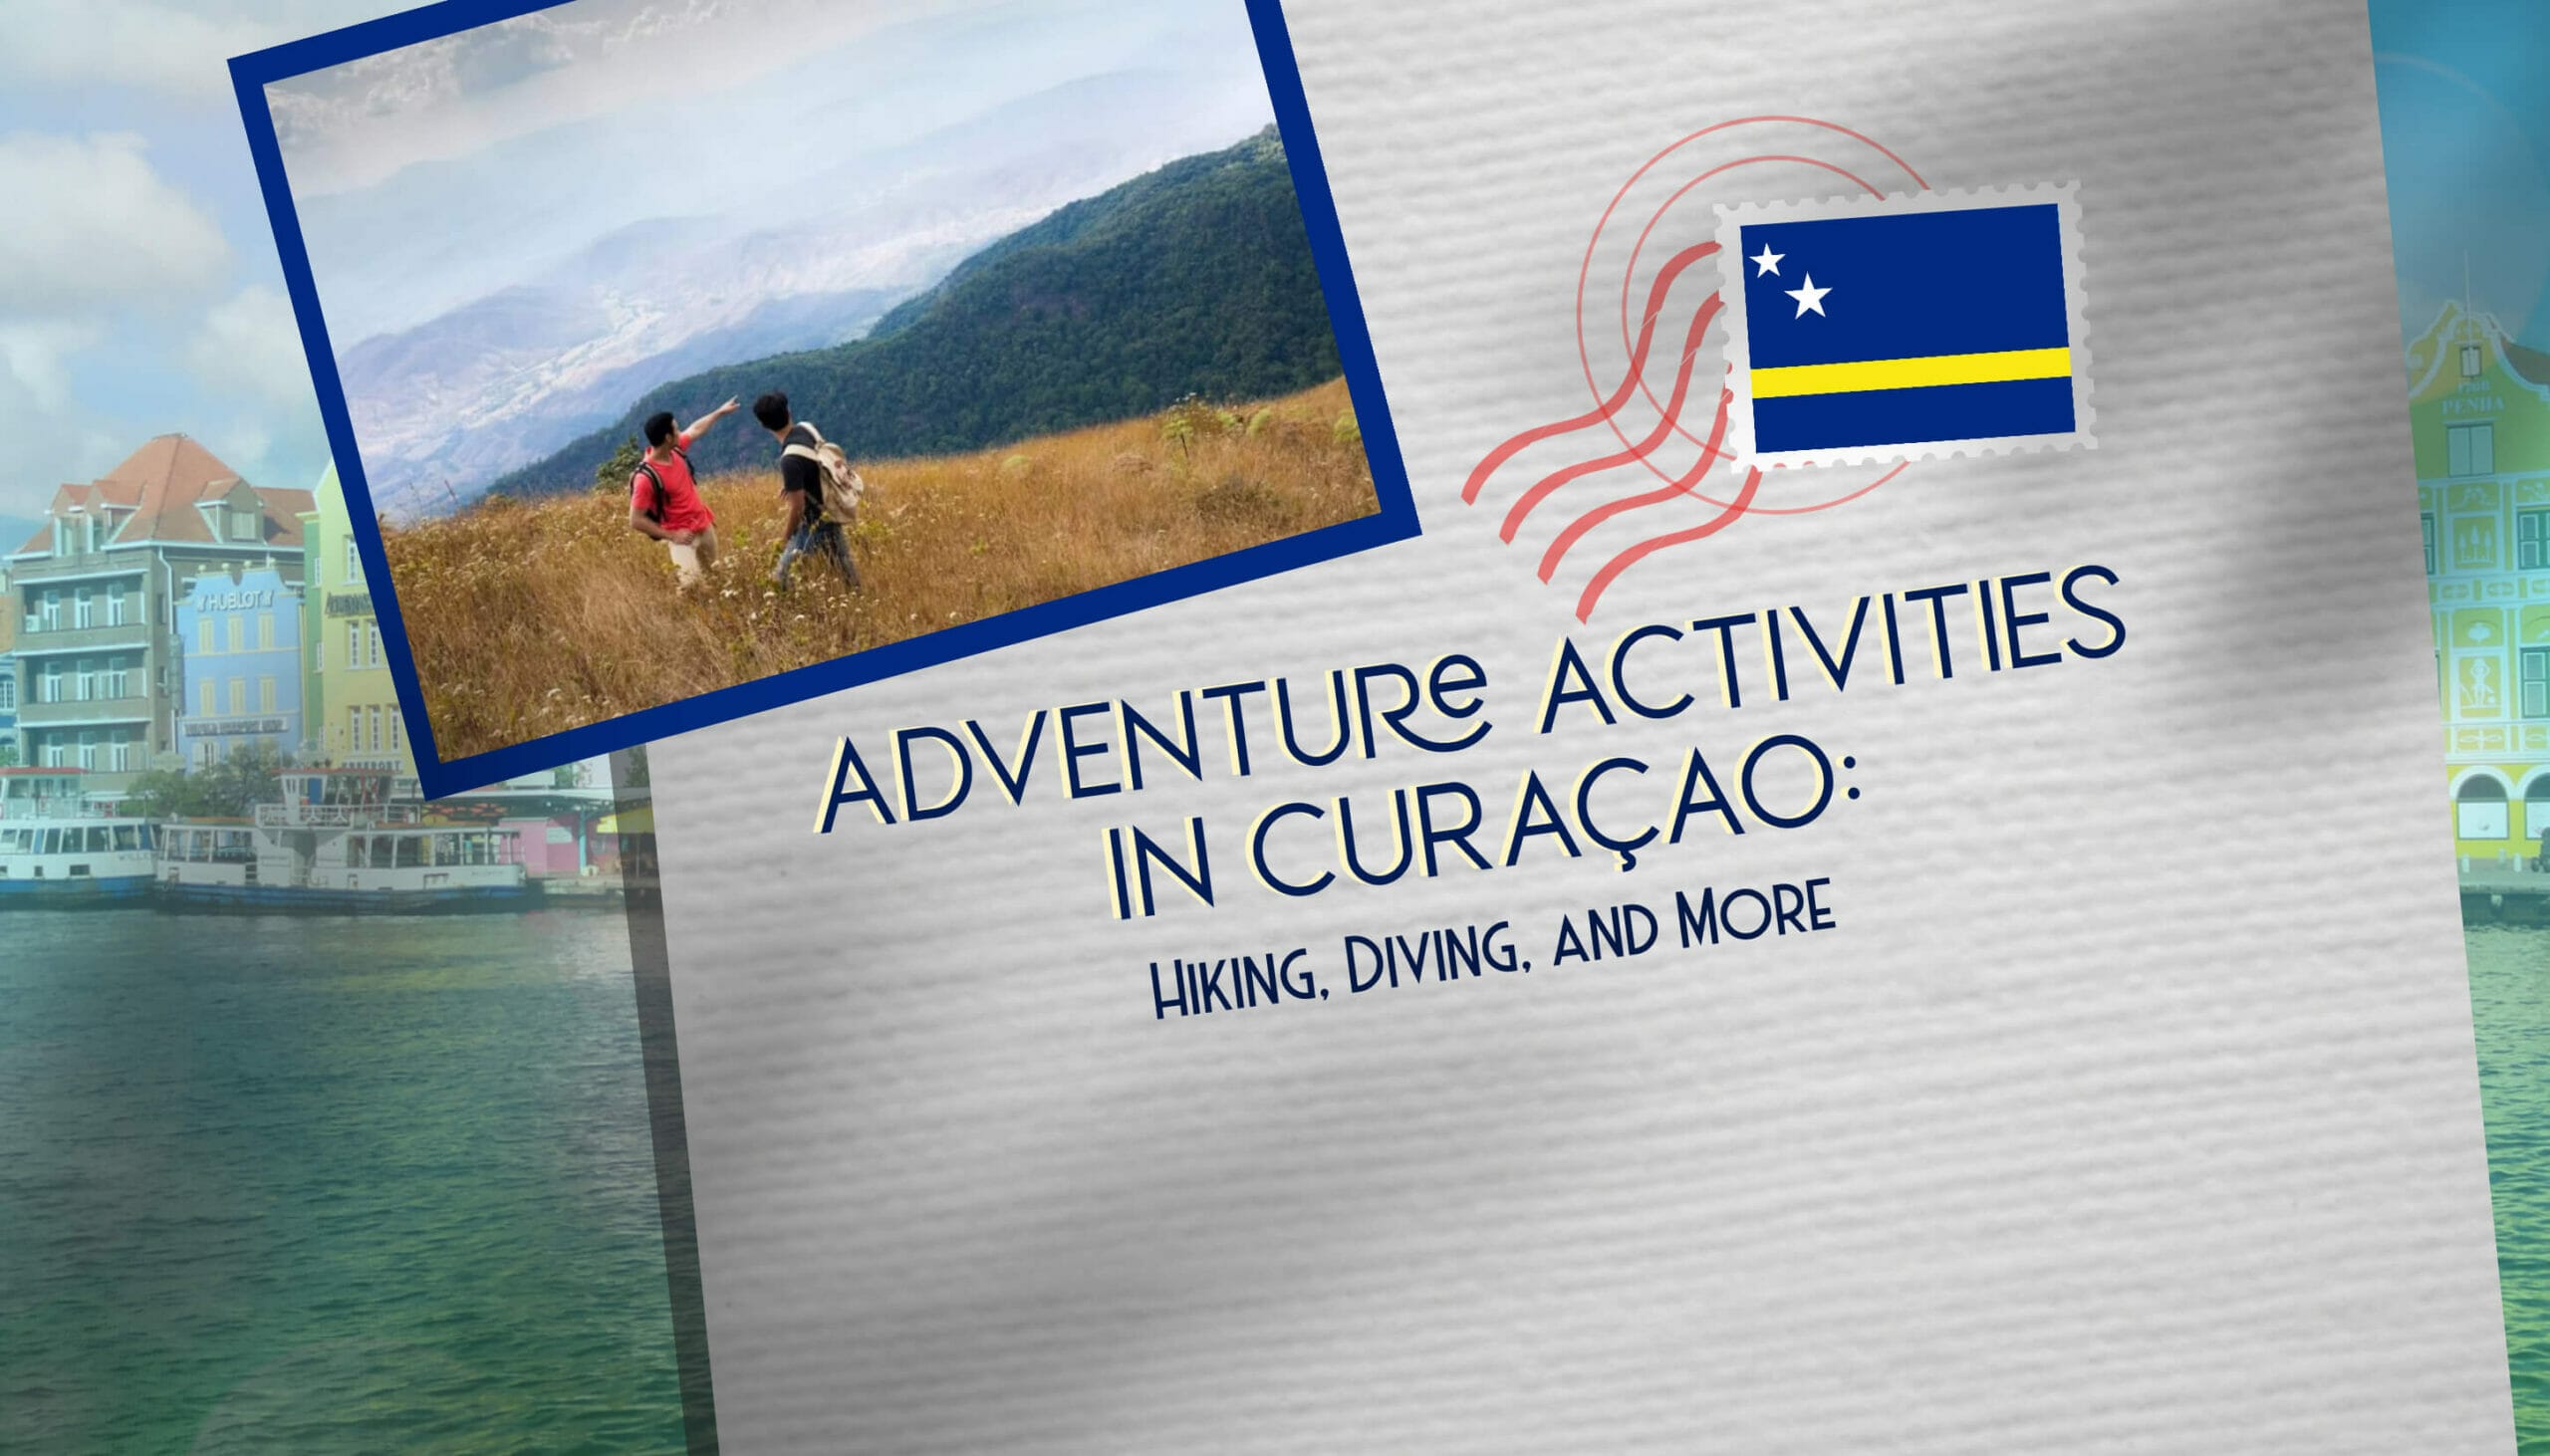 Adventure Activities in Curaçao Hiking, Diving, and More